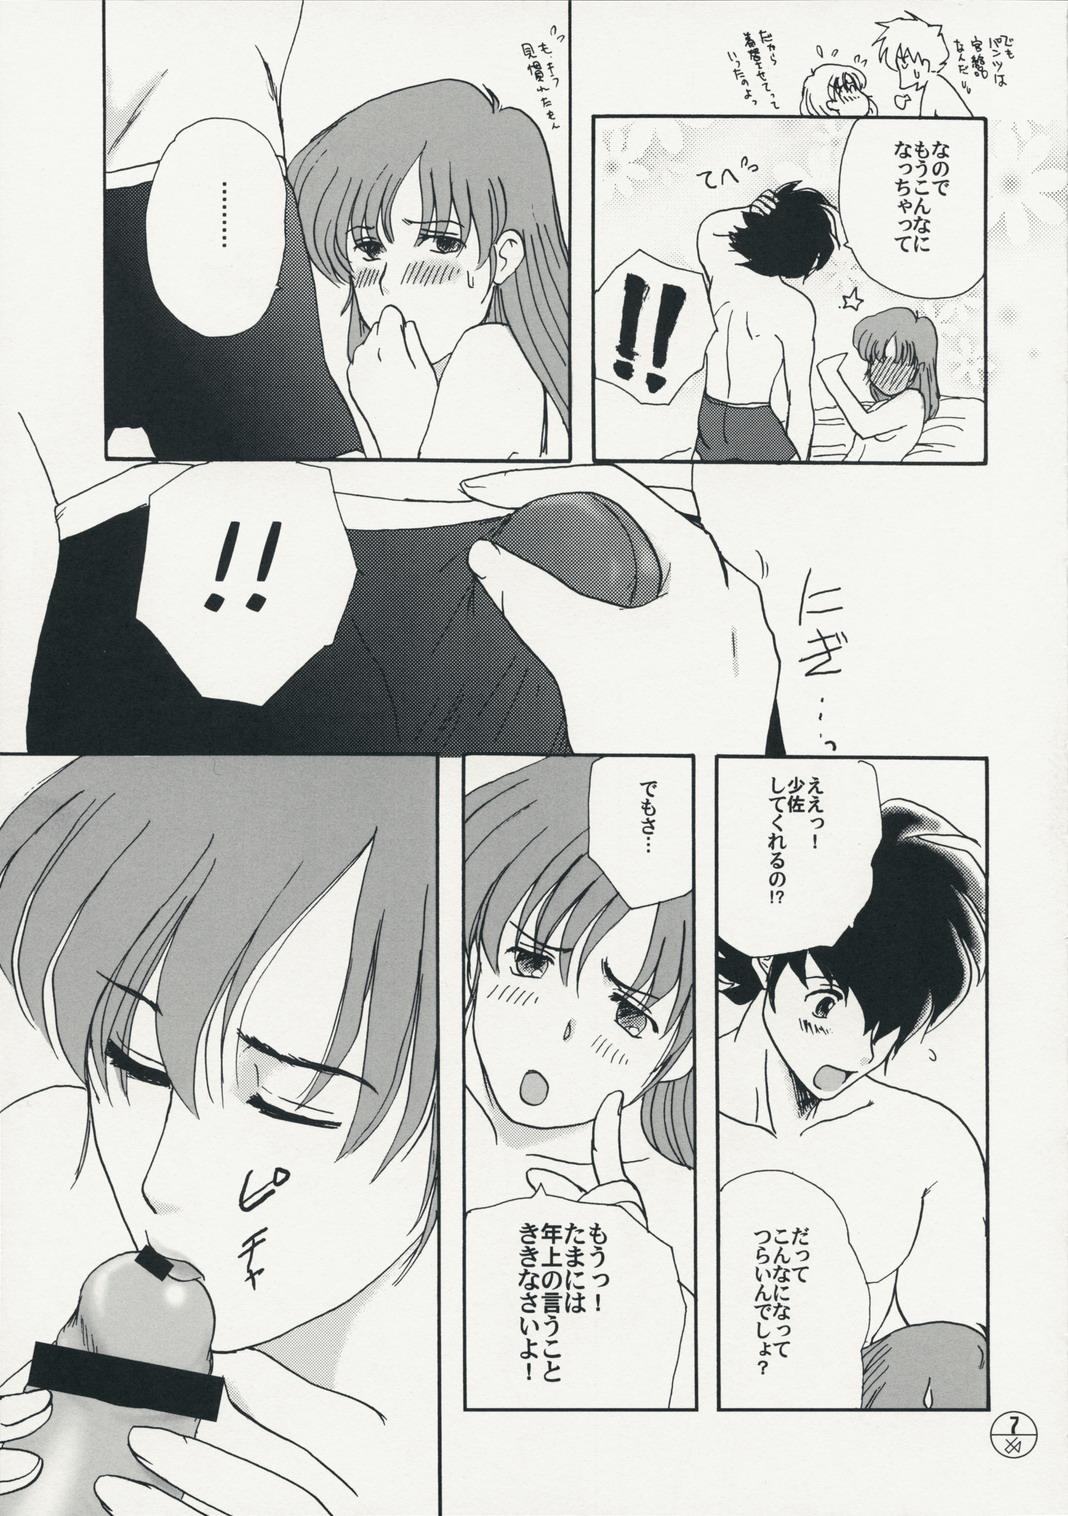 Perverted Chuui! Chotto Machinasai!! - Macross The super dimension fortress macross Blow Jobs Porn - Page 6